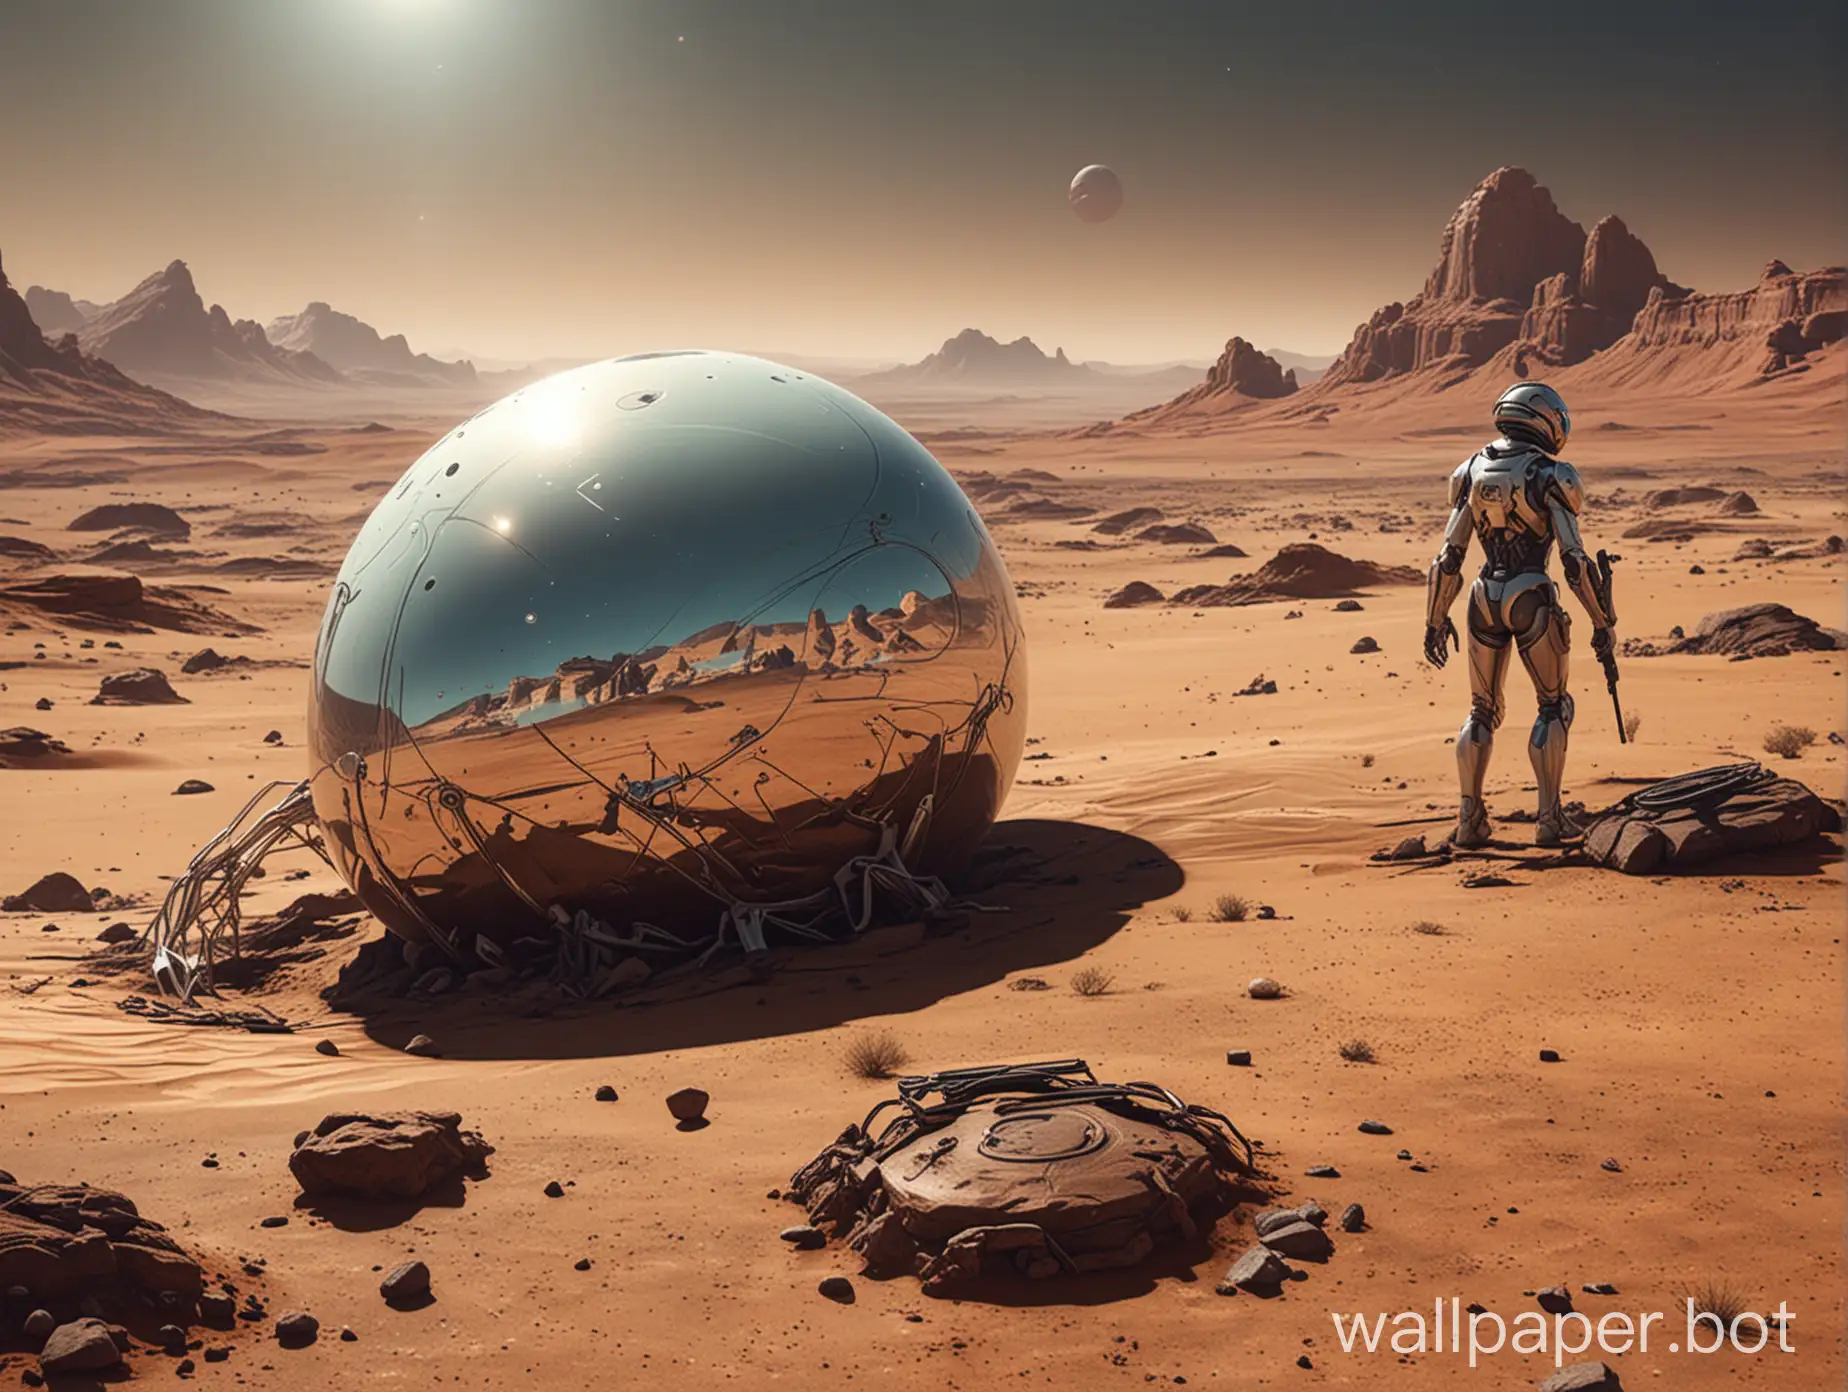 cyberspoon about the future on another planet in the genre of science fiction